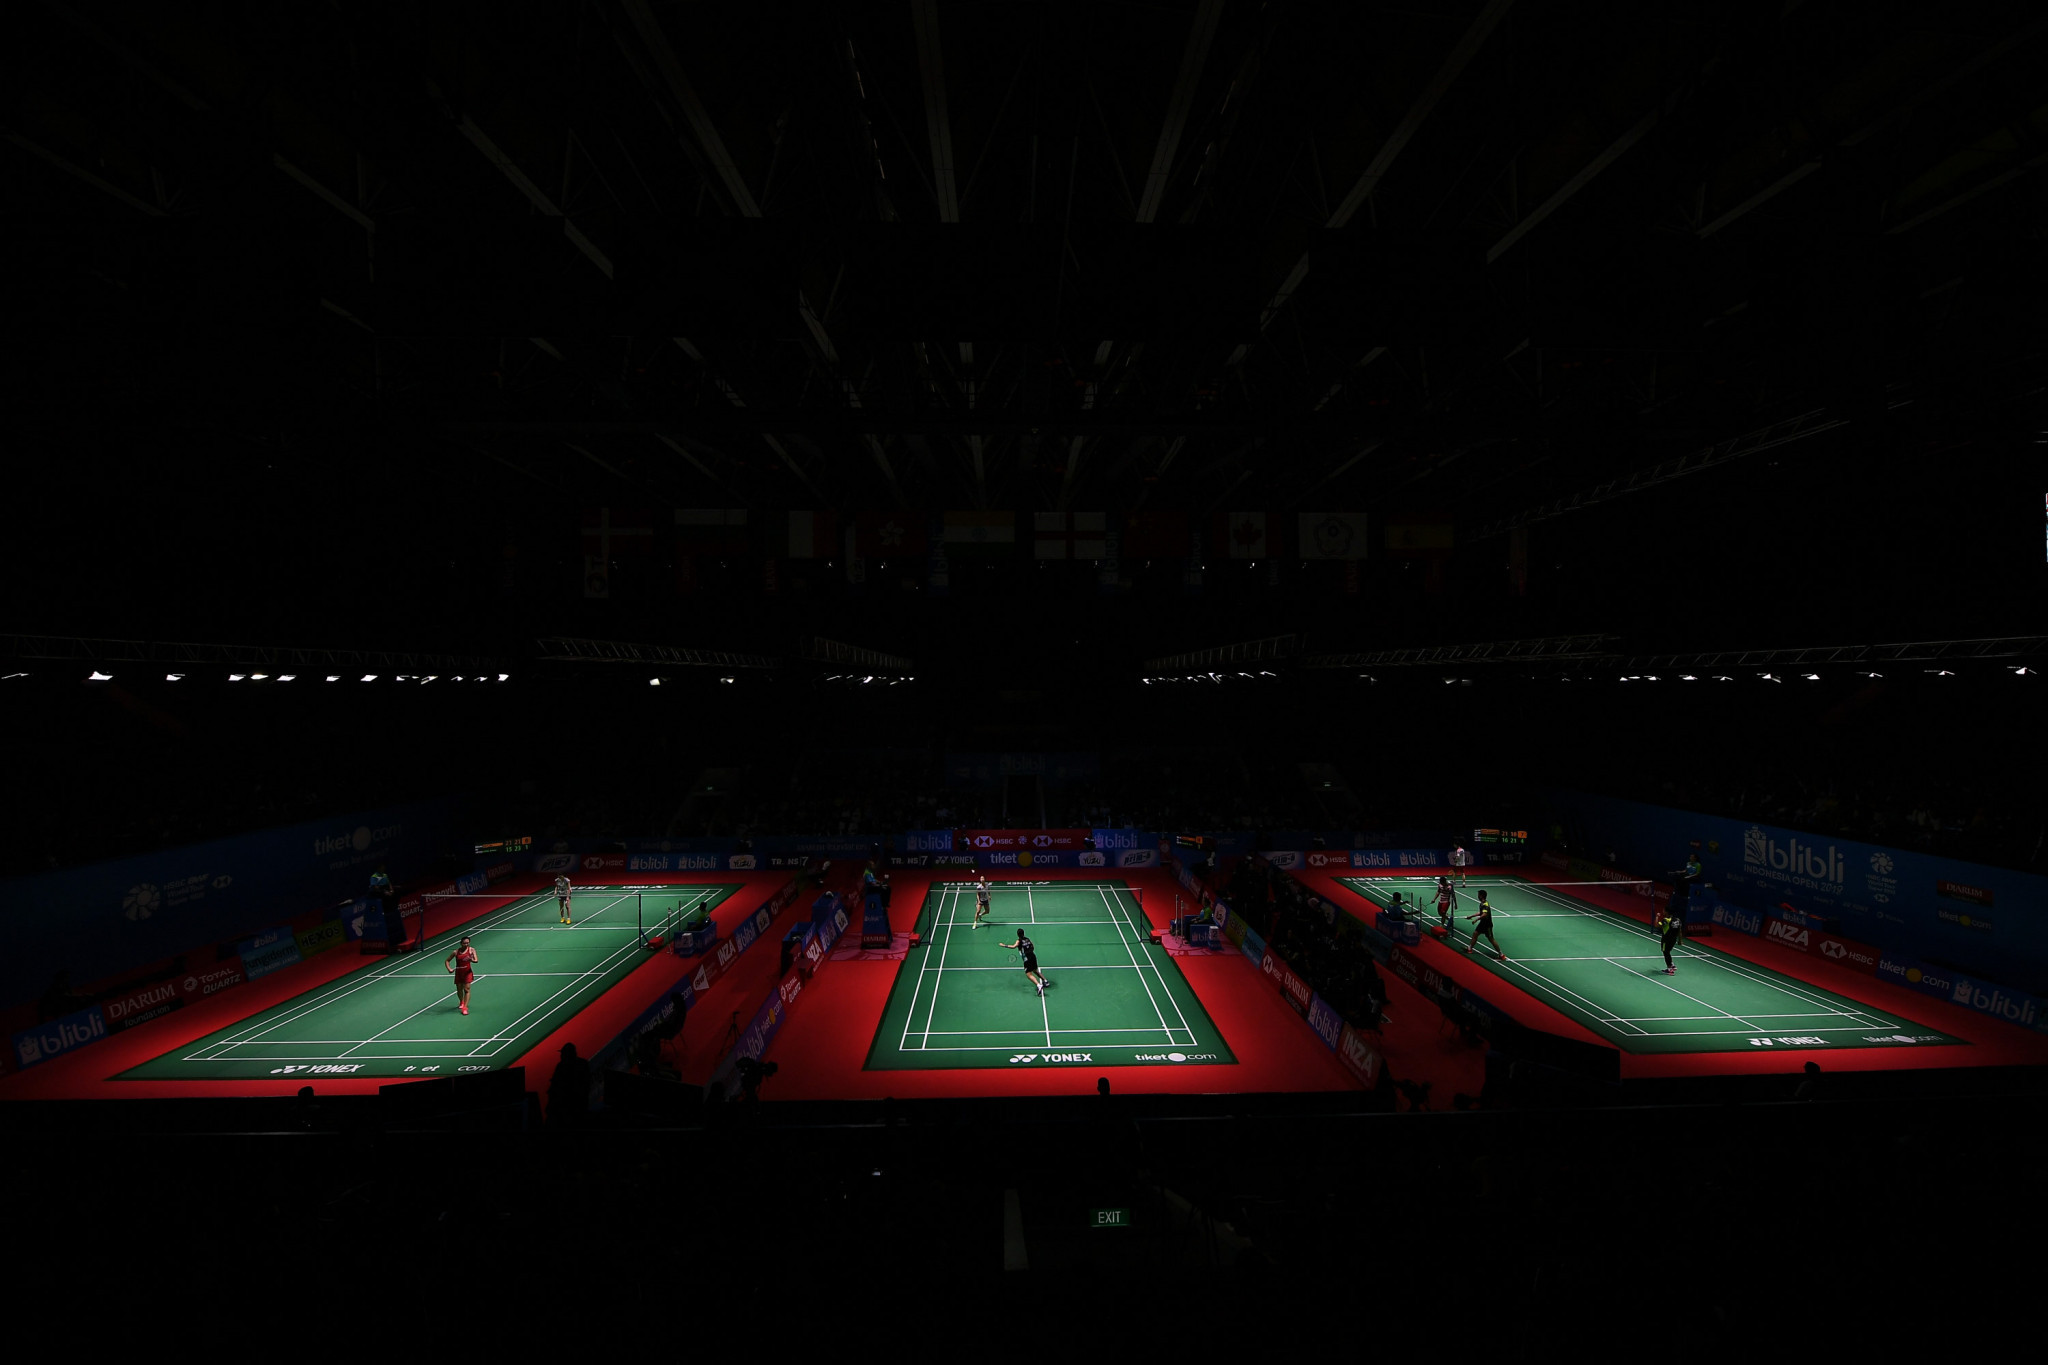 BWF secretary general Thomas Lund says tournaments are likely to be clustered together throughout 2021 ©Getty Images